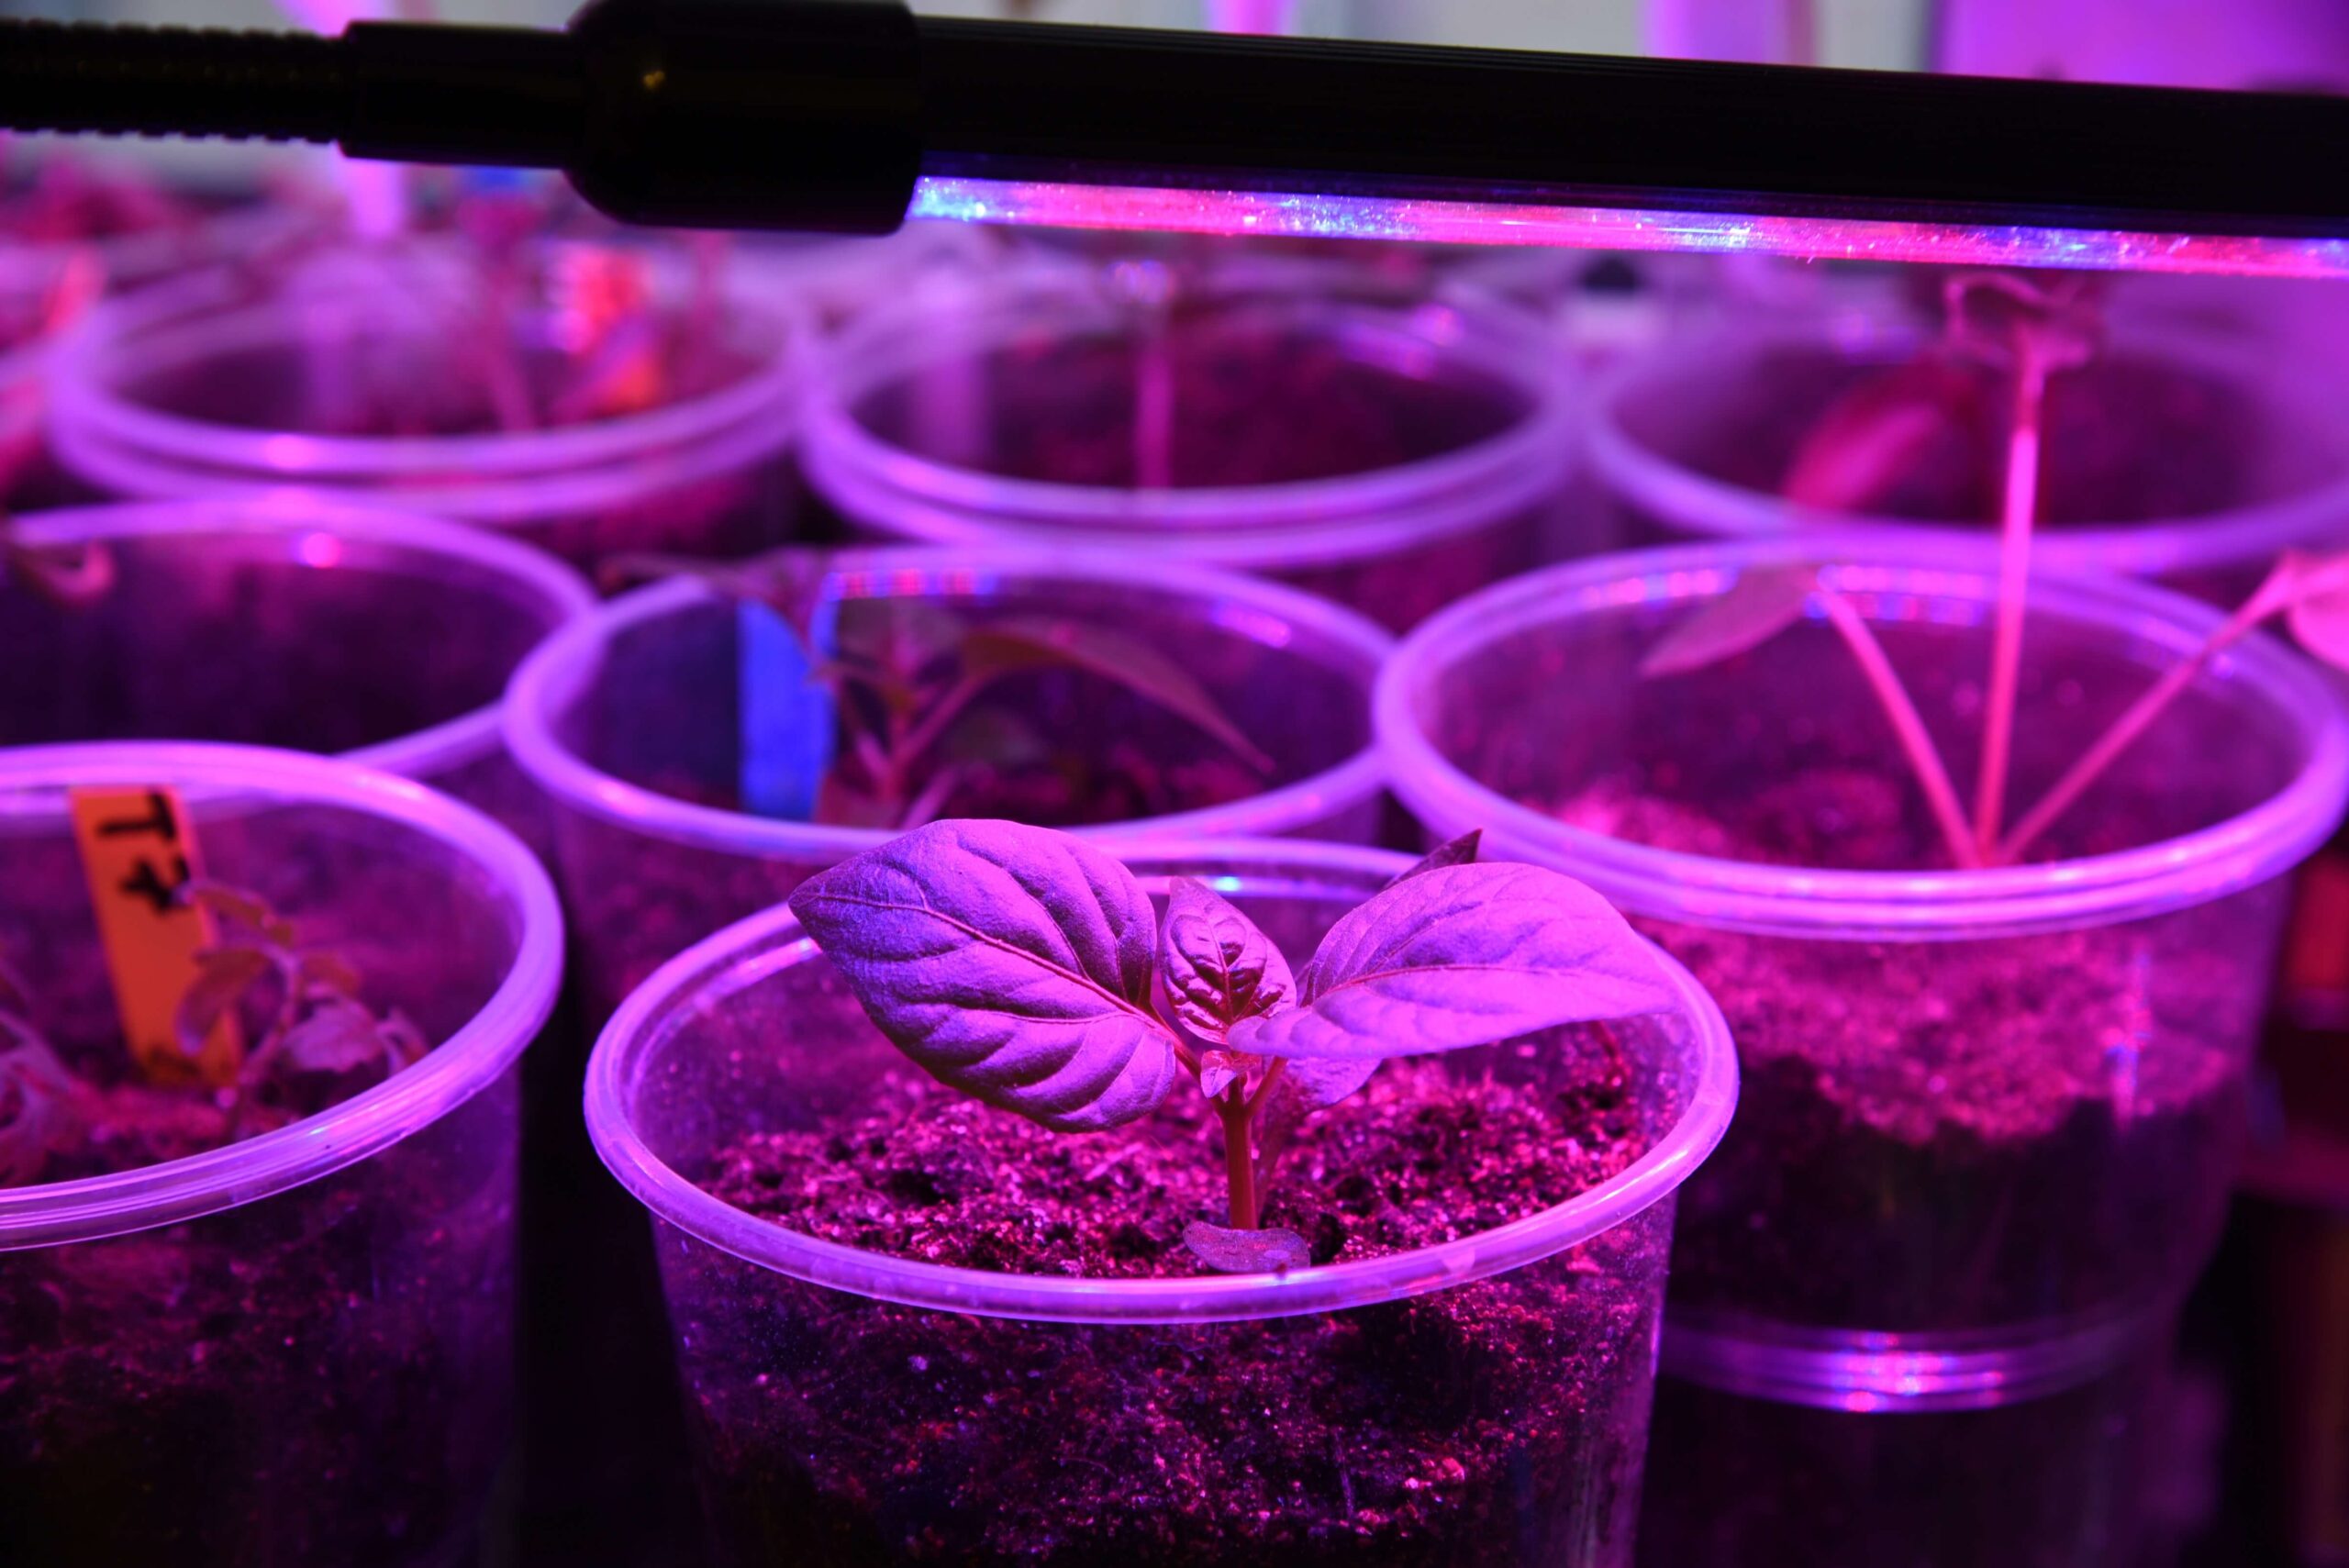 Why LED Grow Lights Give You Purple Light? Do Your Plants Need Ultraviolet (UV) Light?